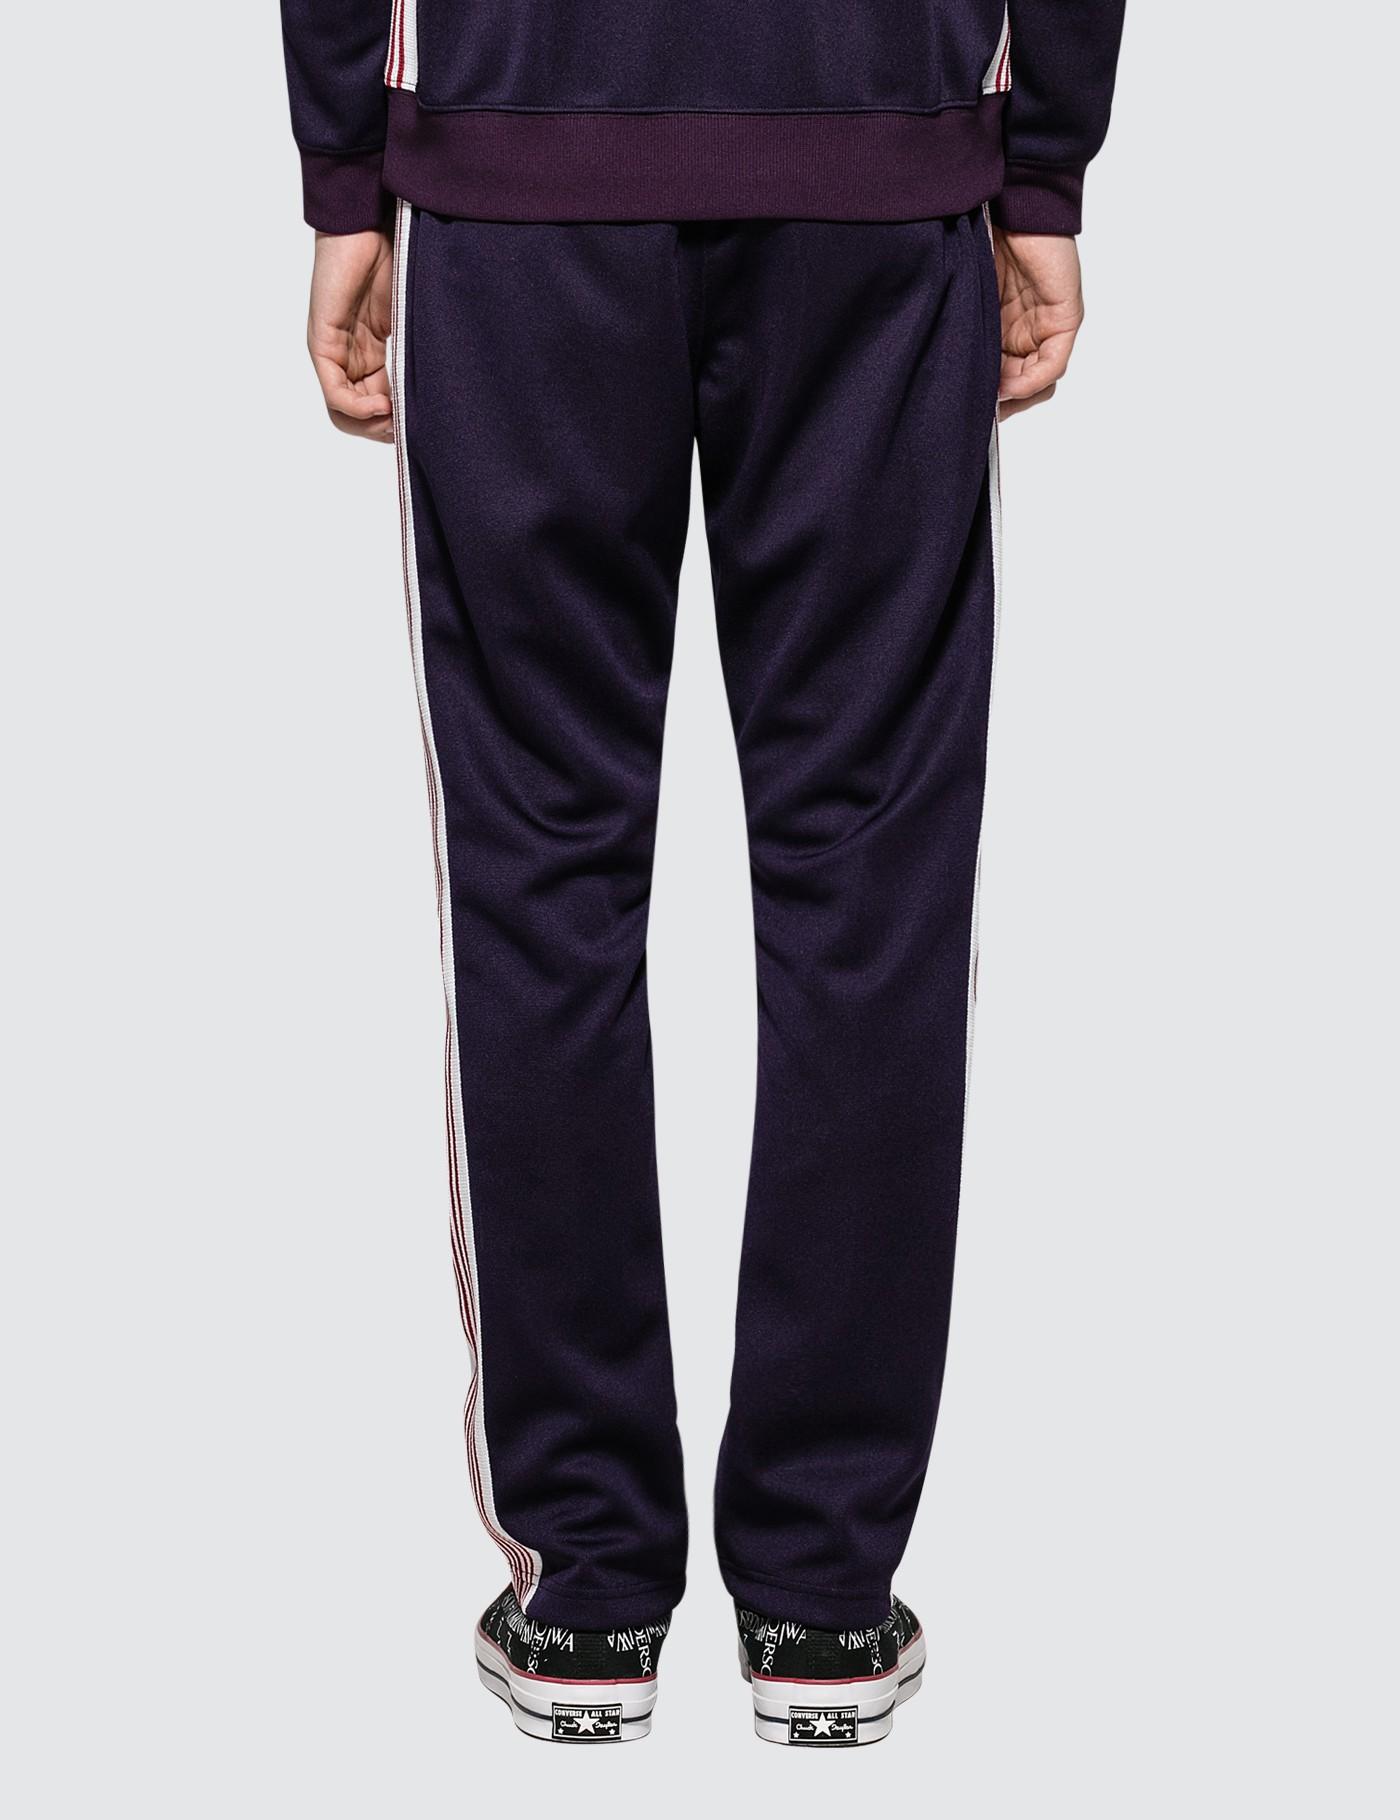 Needles Synthetic Narrow Track Pants in Purple for Men - Lyst